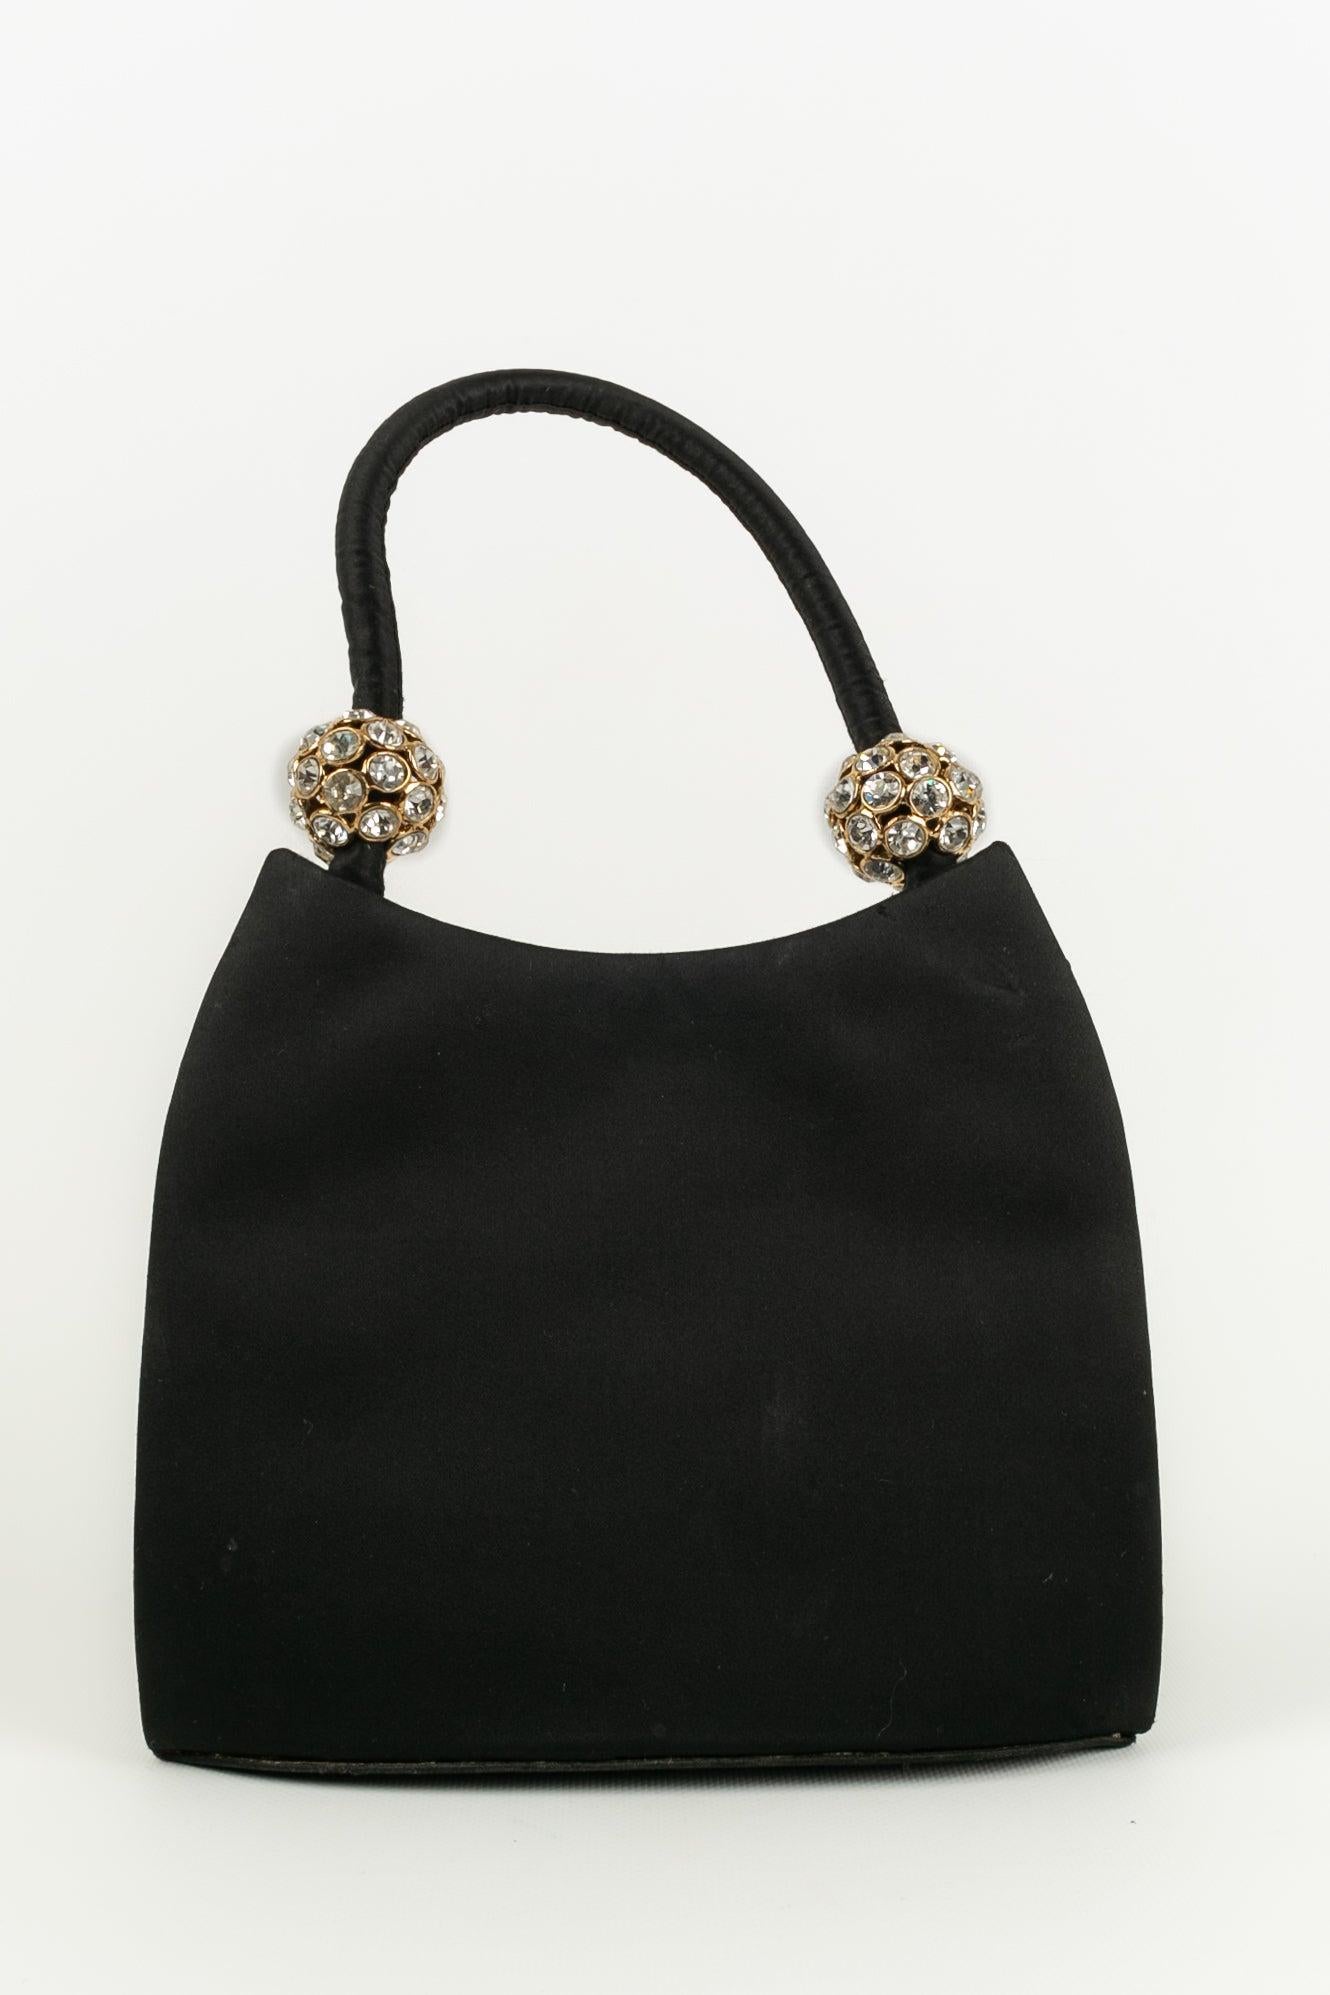 Christian Lacroix Black Silk, Gold Metal and Rhinestone Bag In Good Condition For Sale In SAINT-OUEN-SUR-SEINE, FR